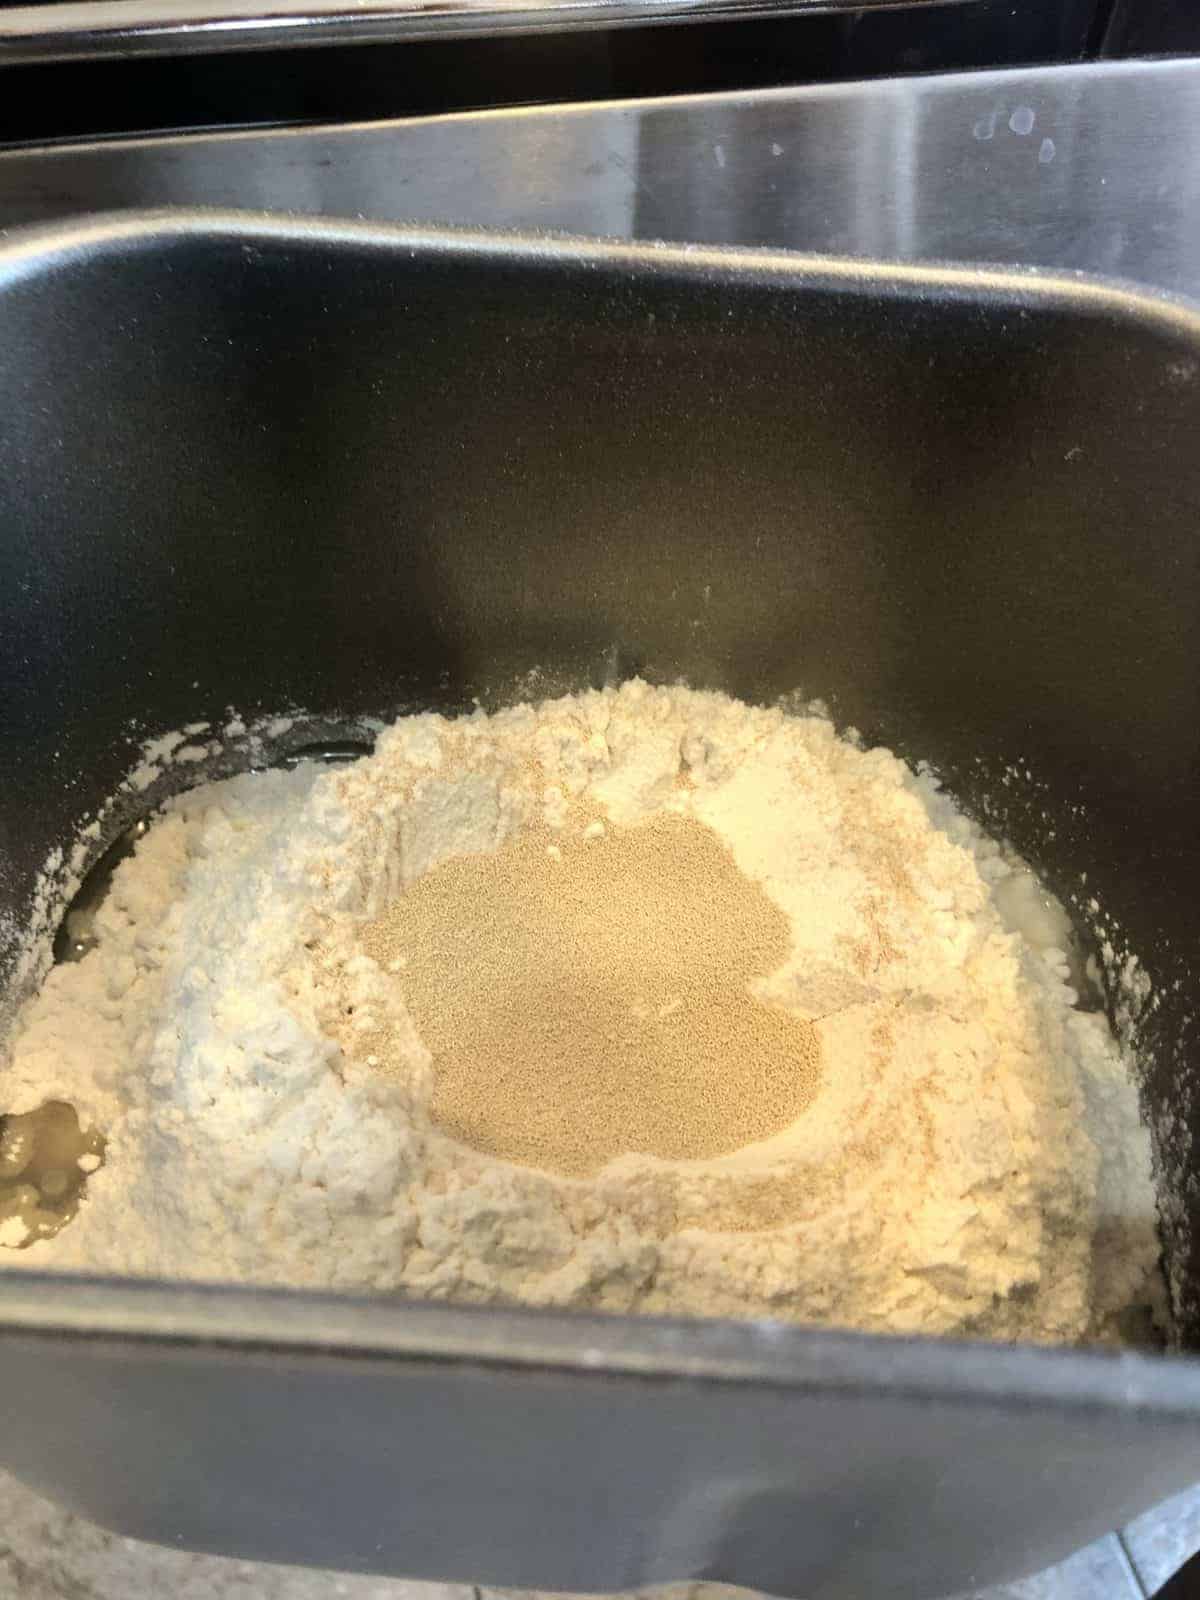 Flour yeast and vegetable oil in the bucket of a bread making machine